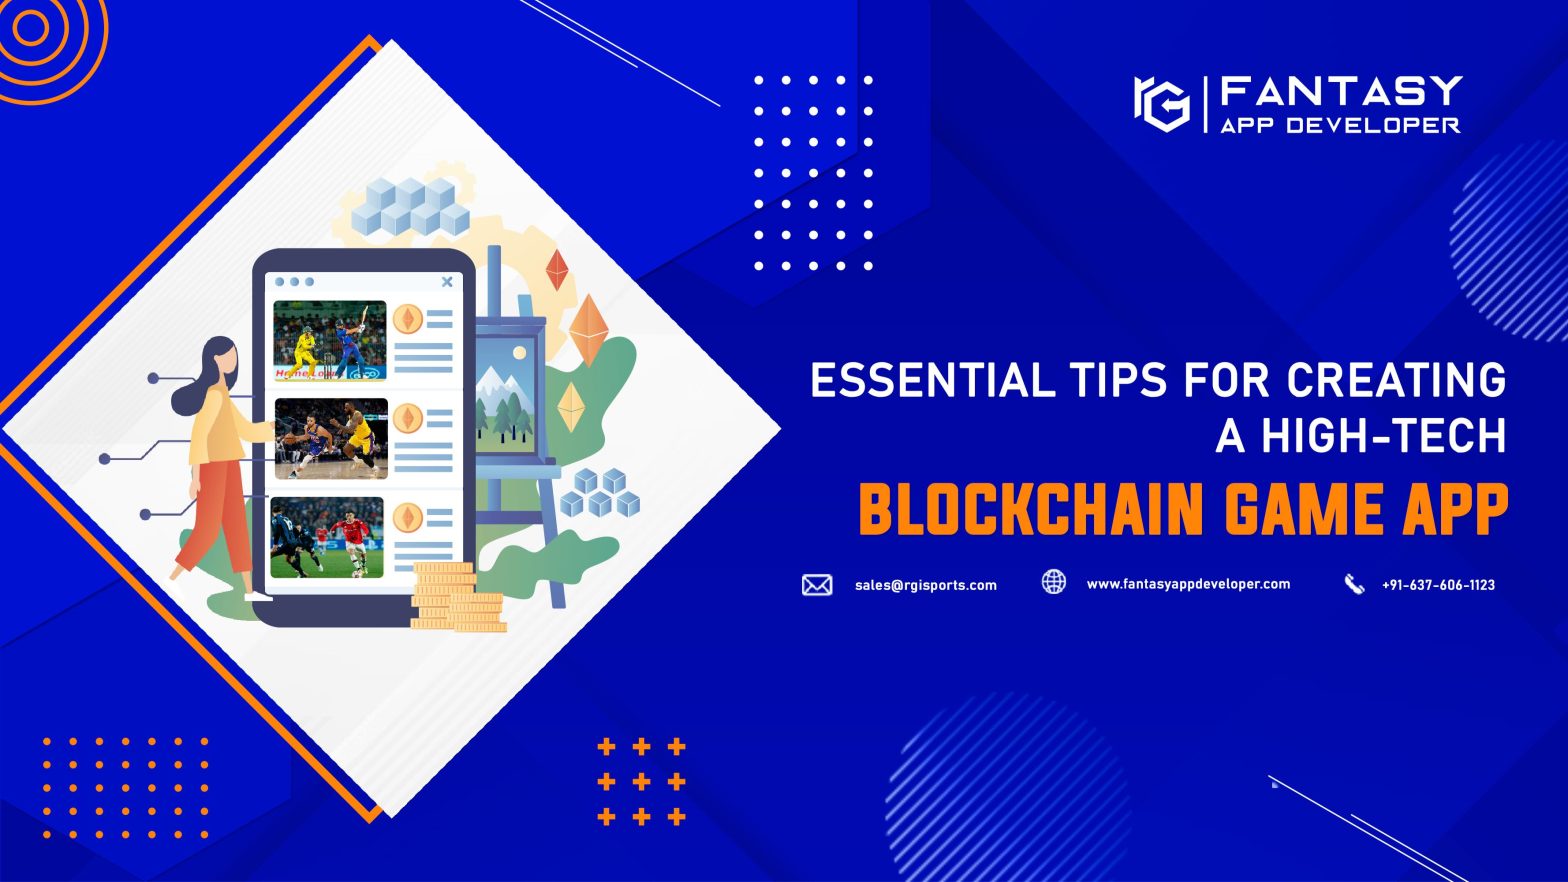 Essential Tips For Creating a High-tech Blockchain Game App